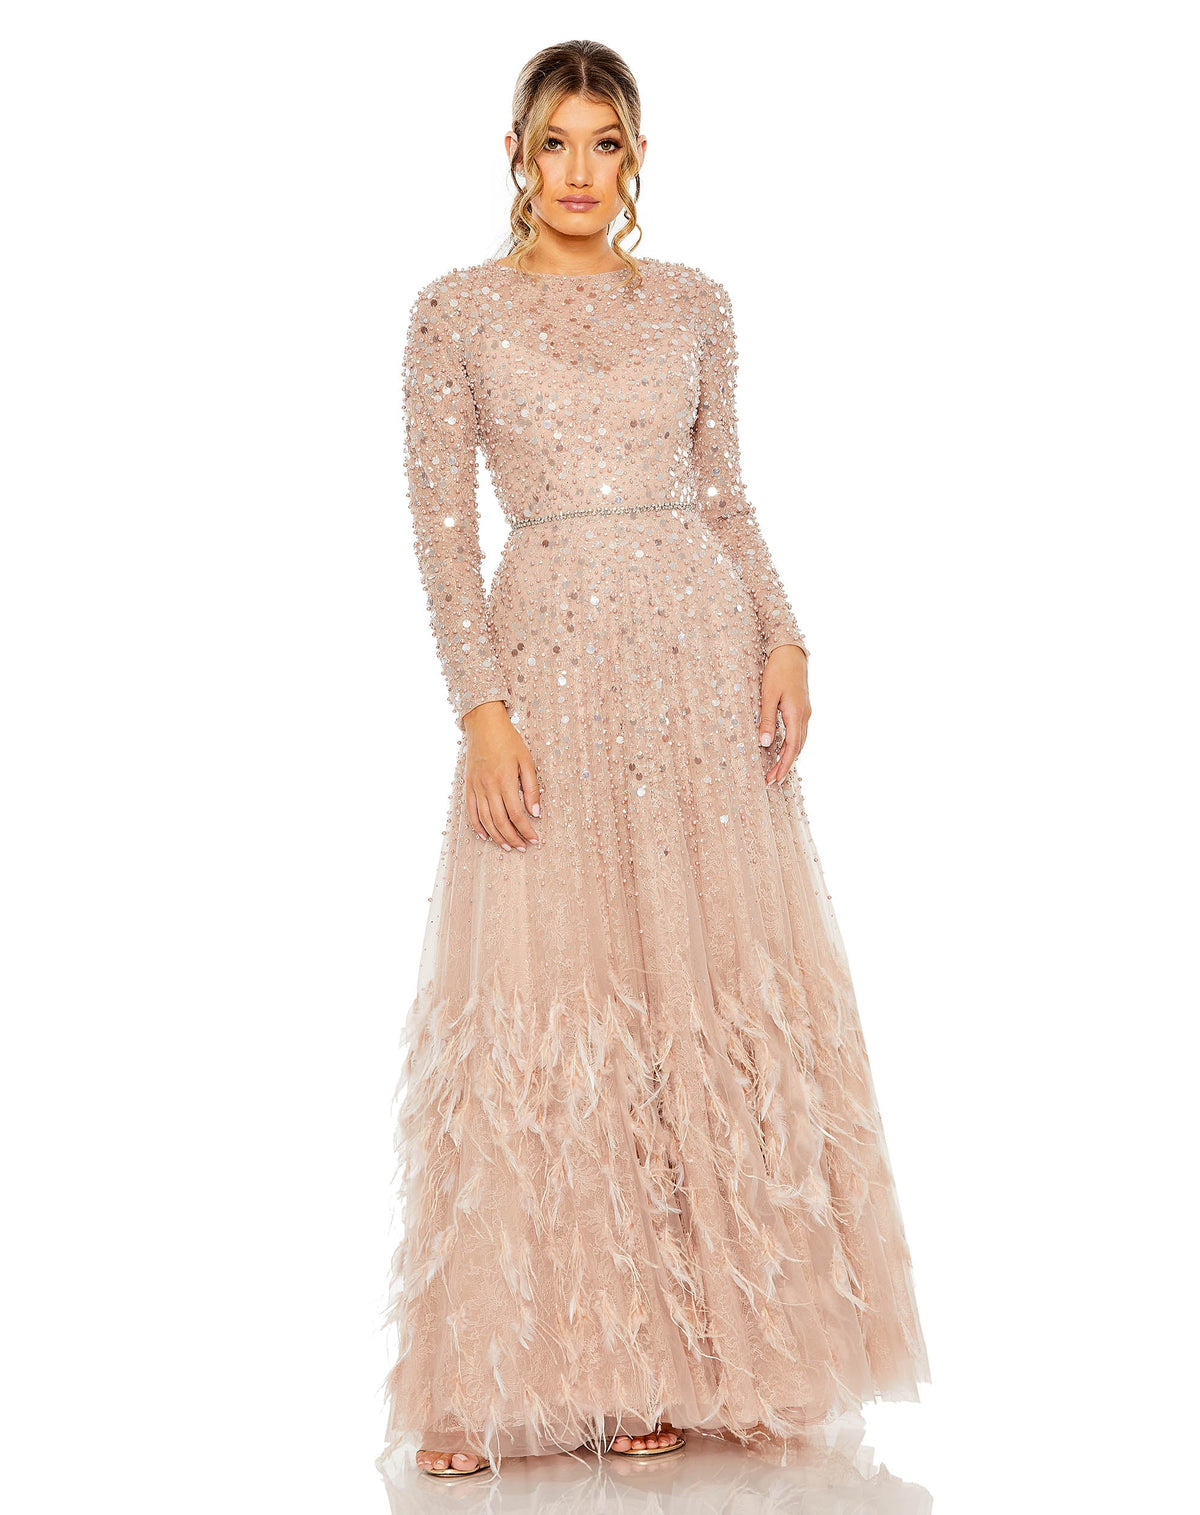 mac duggal, DISC EMBELLISHED SEQUIN GOWN WITH FEATHER DETAIL, Style #11782, dusty rose